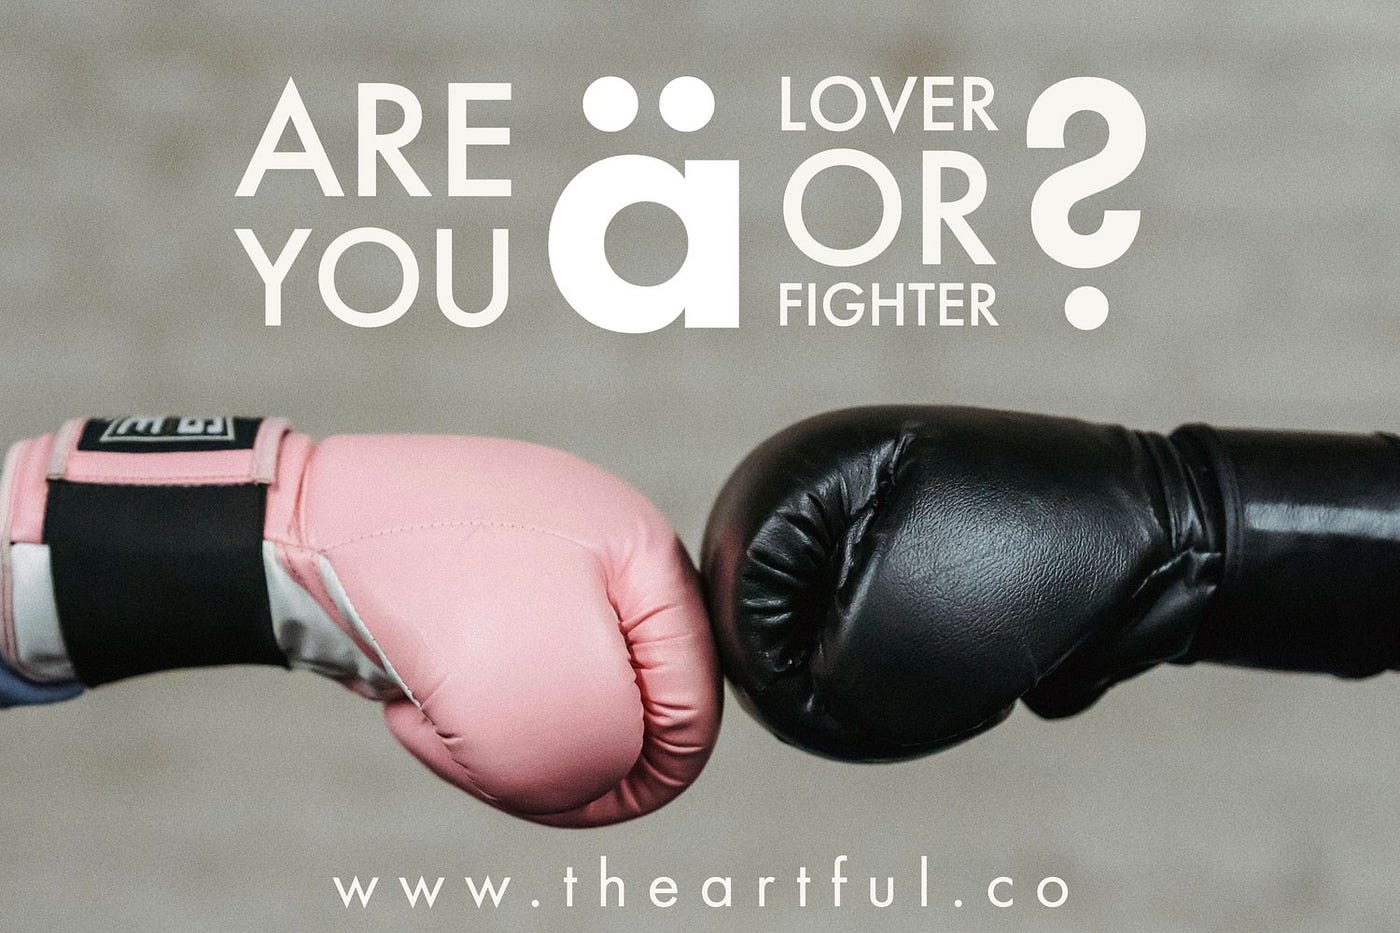 Anonymous fighters bumping fists before boxing w/ a pink glove and a black glove. Are you a lover or fighter? (text)